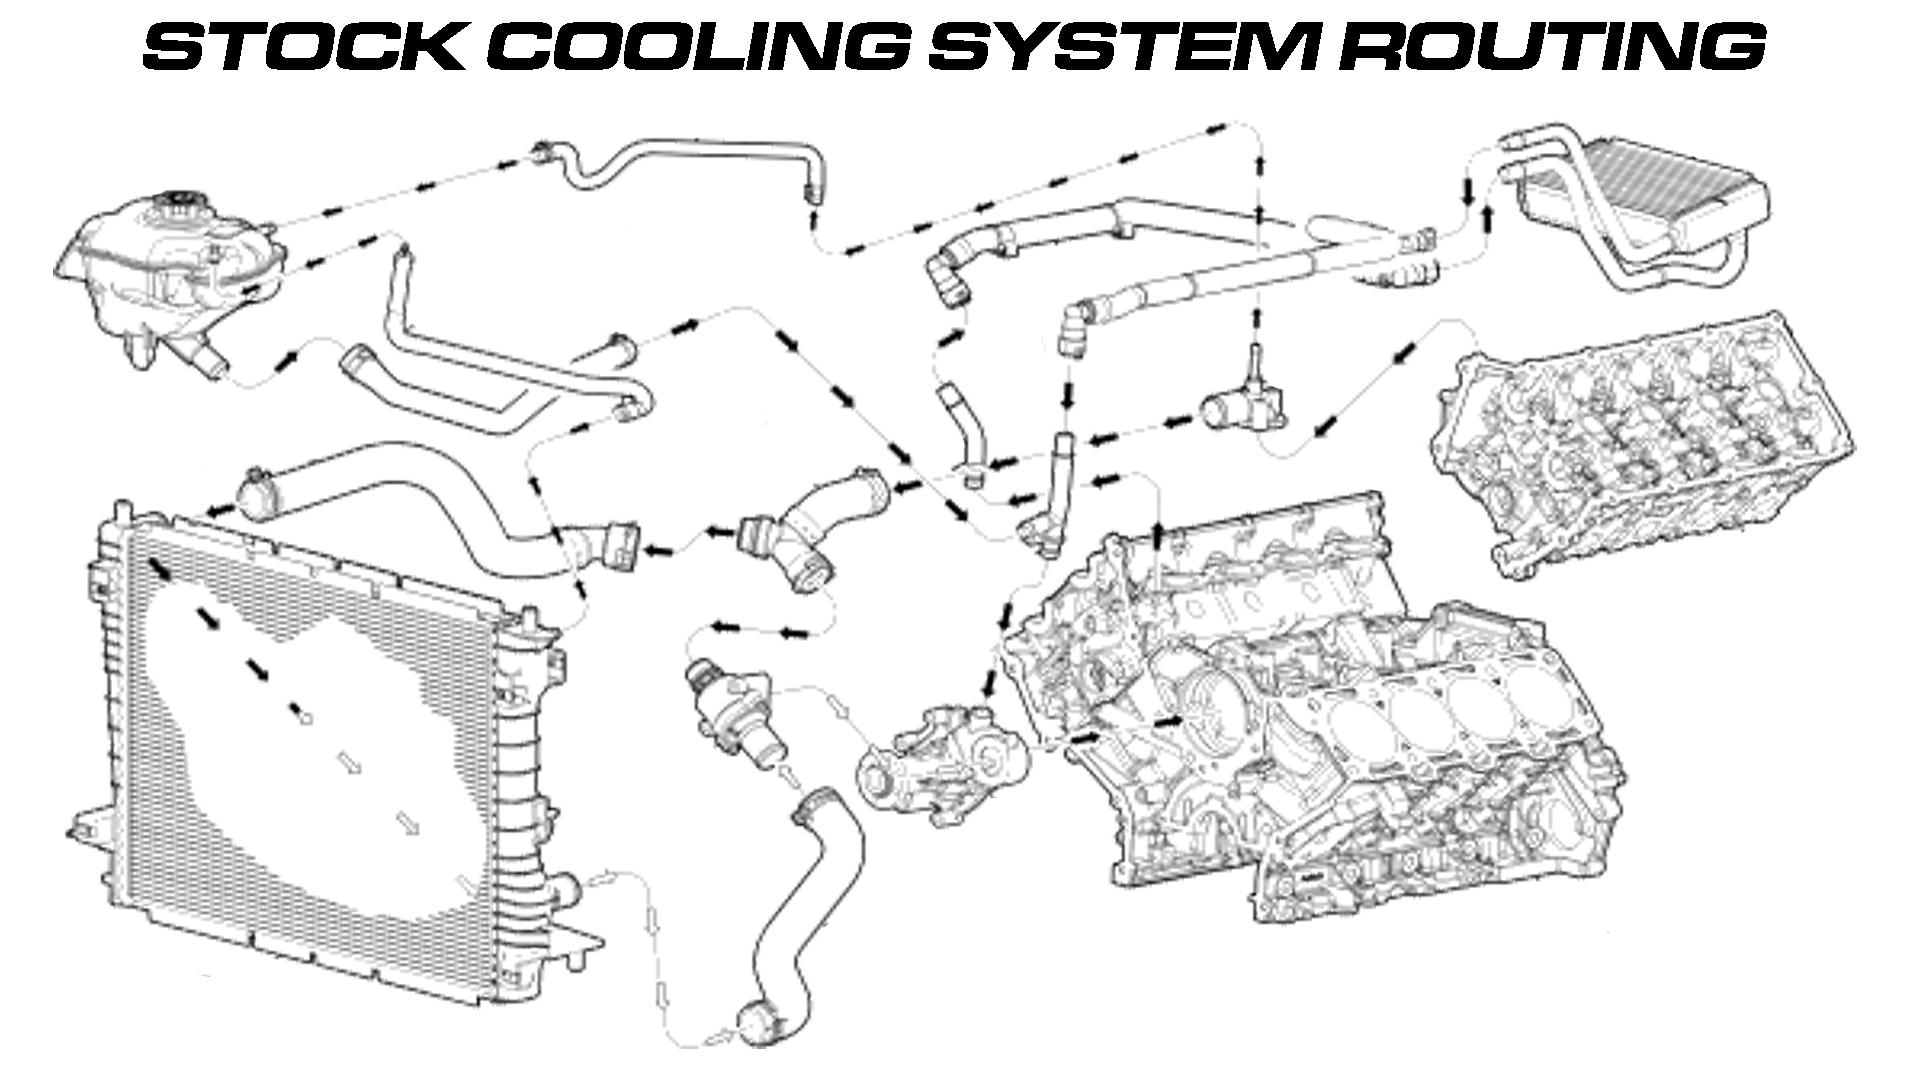 5.0 Coyote Cooling System Diagram 1